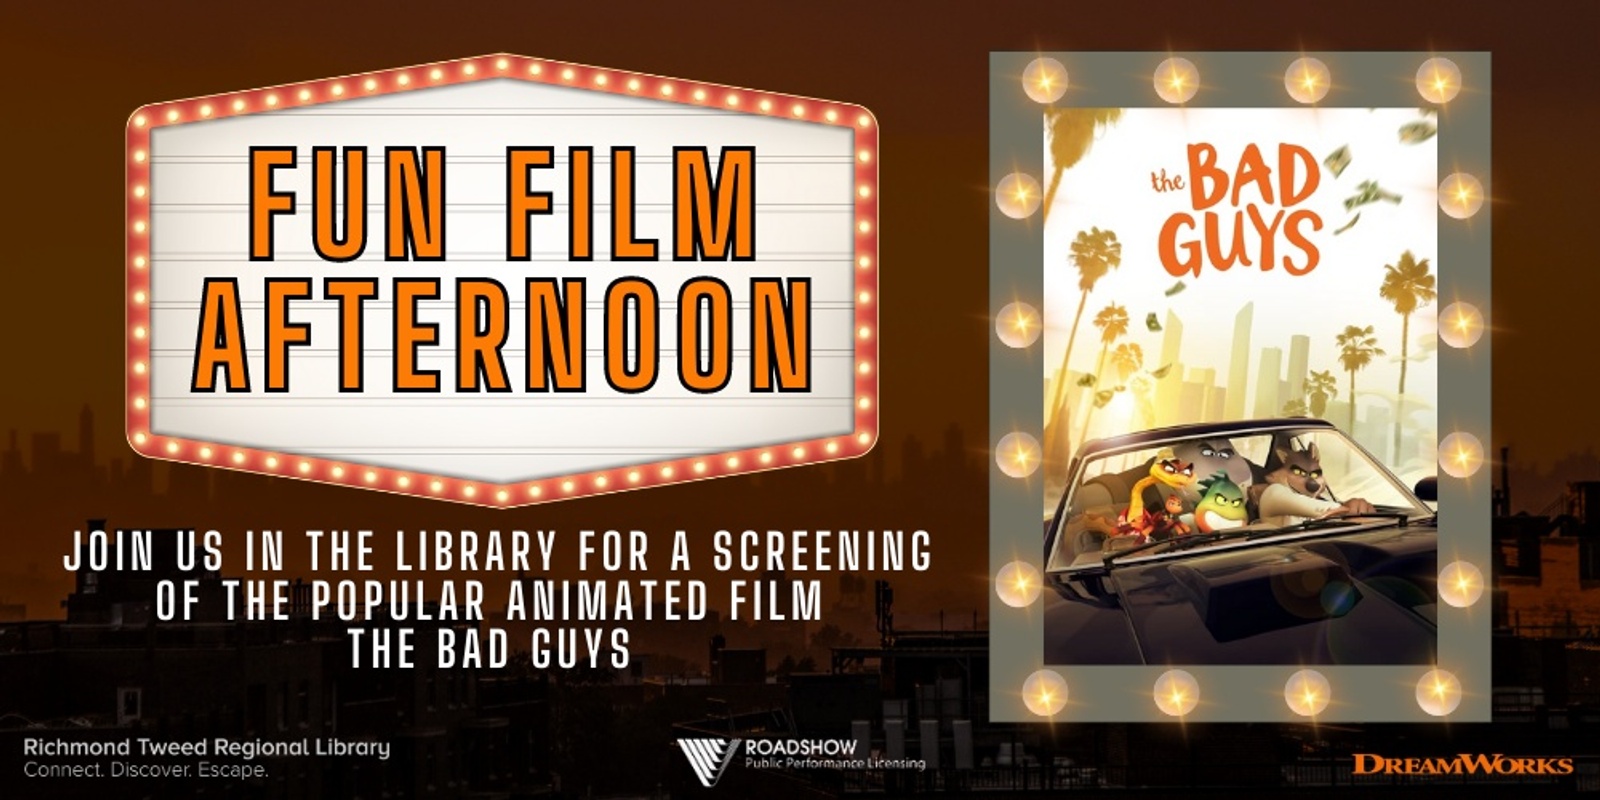 Banner image for Ballina Fun Film Afternoon - The Bad Guys